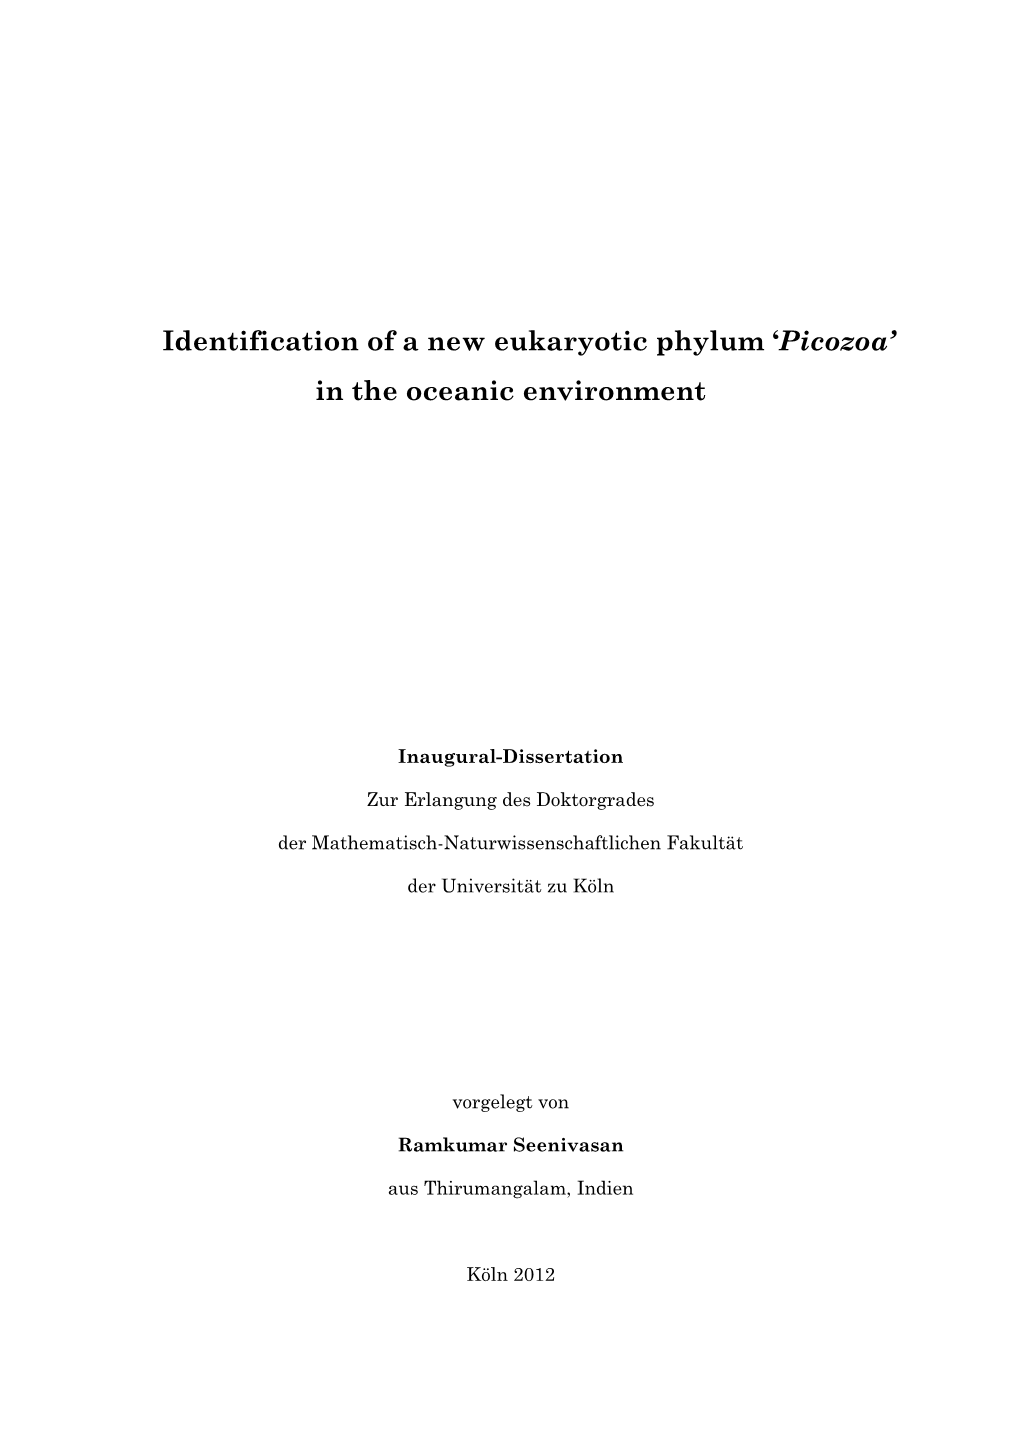 Identification of a New Eukaryotic Phylum ‘Picozoa’ in the Oceanic Environment